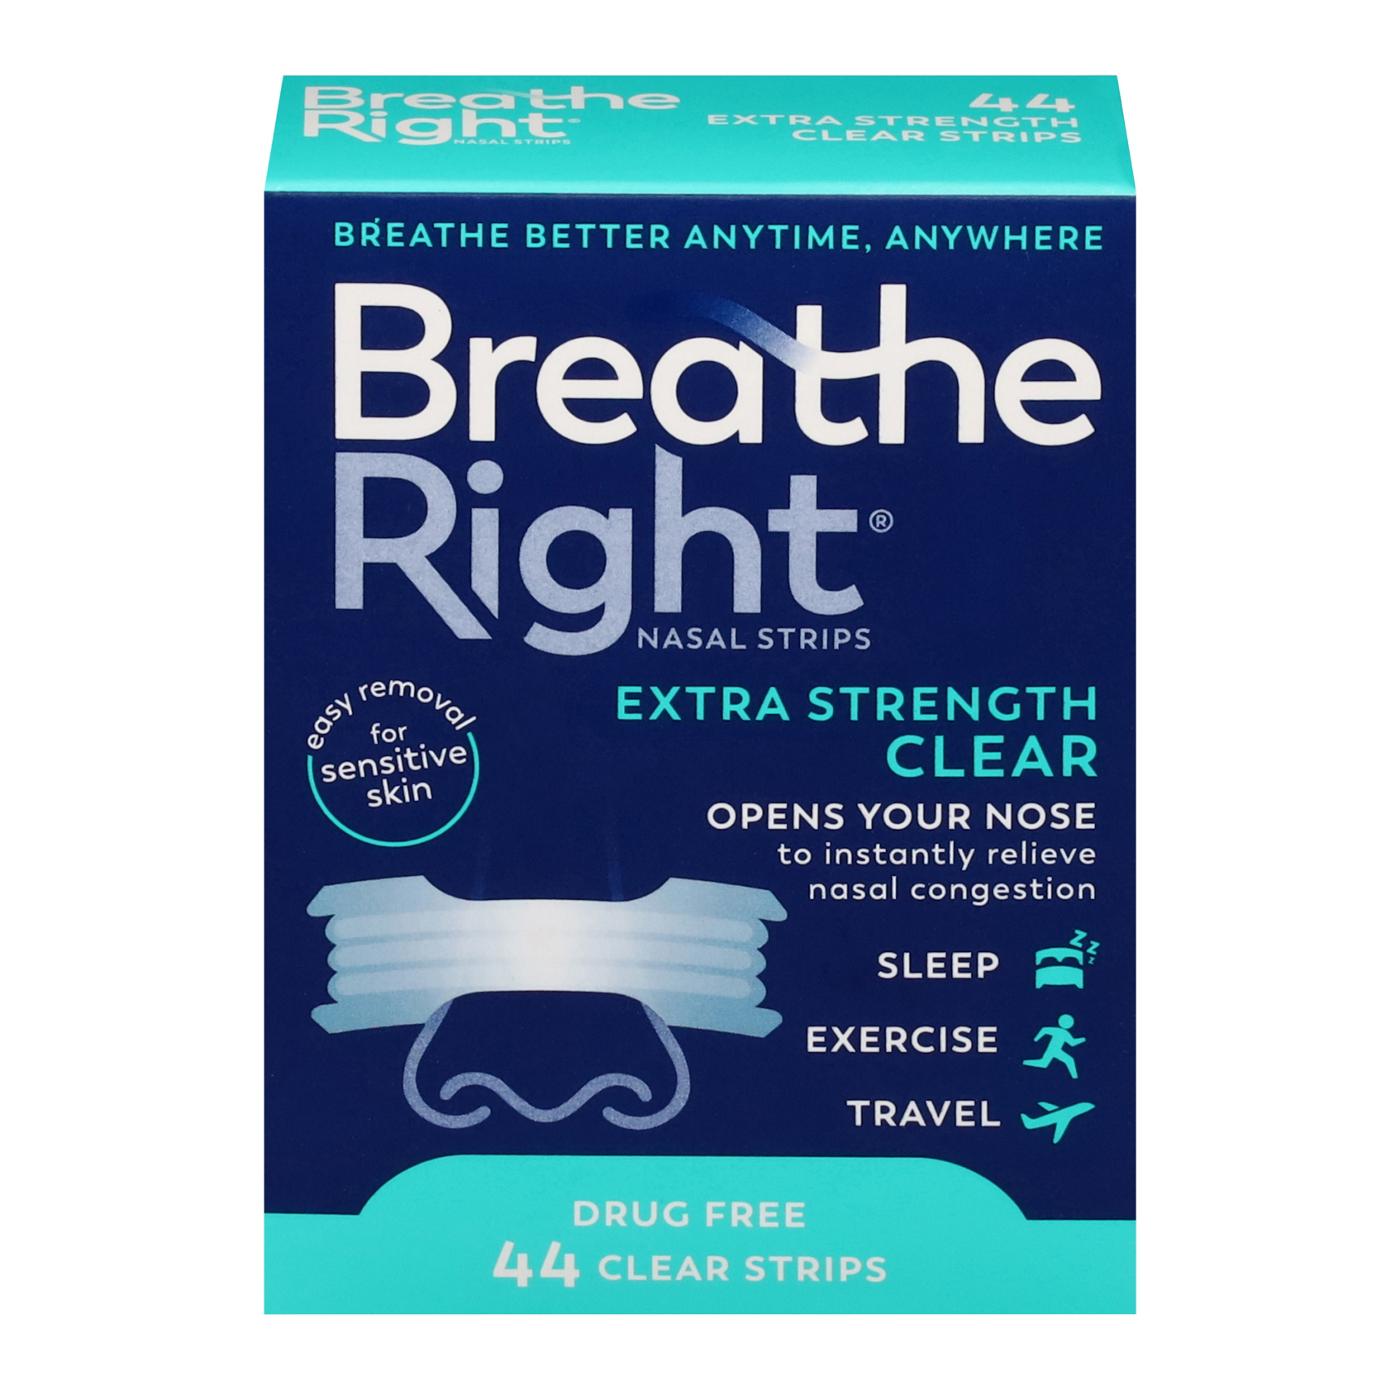 Breathe Right Extra Strength Clear Nasal Strips; image 1 of 2